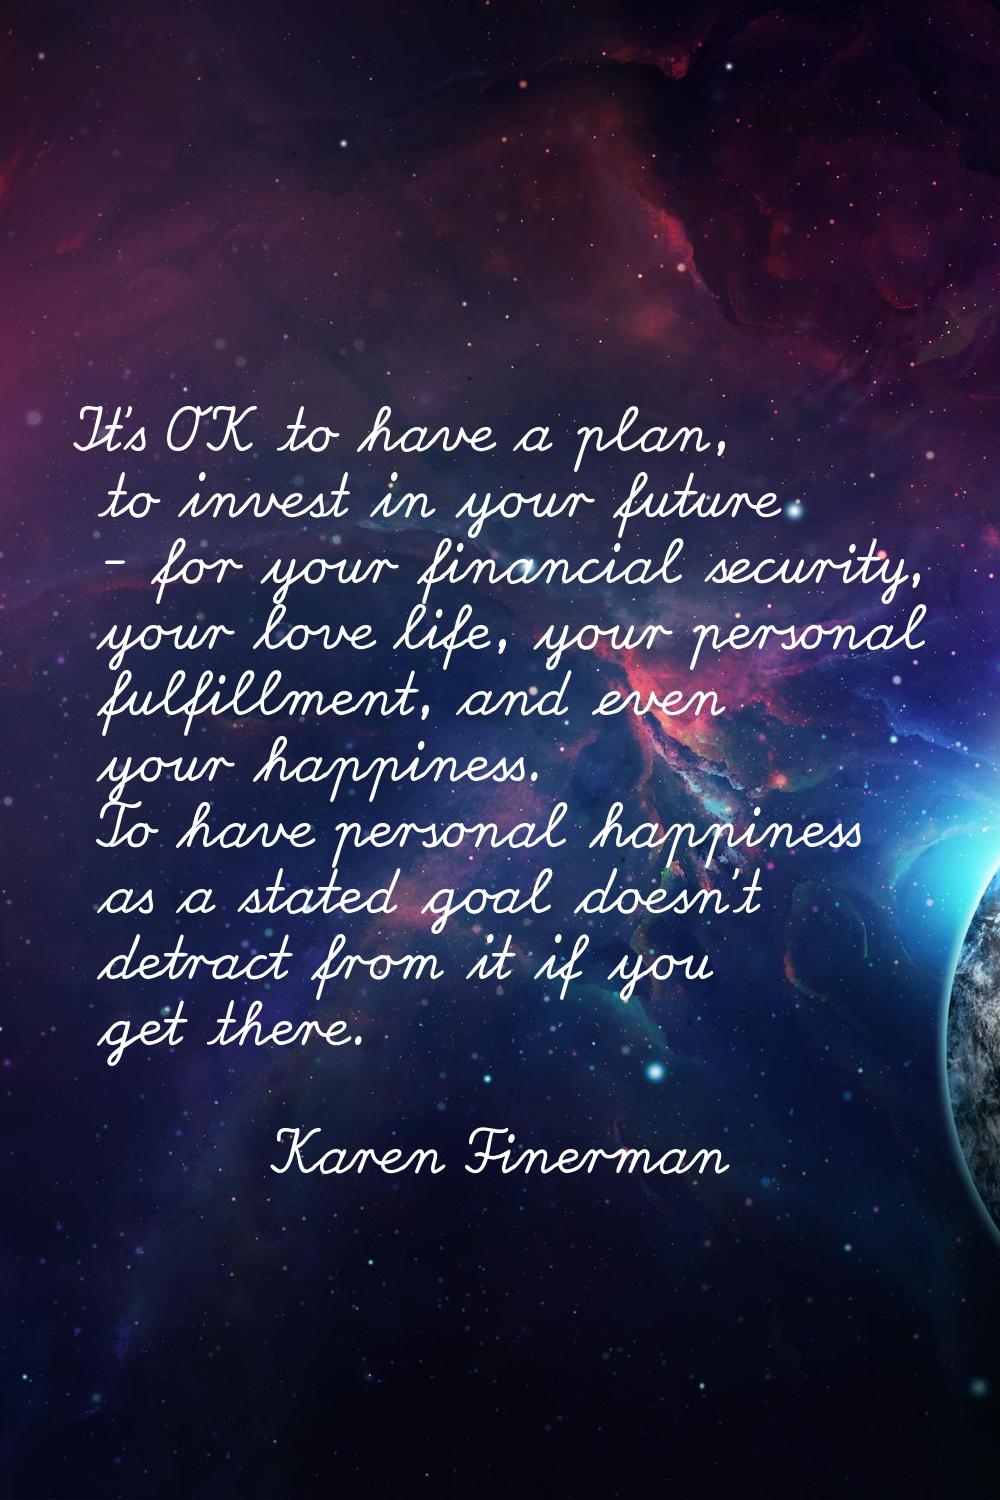 It's OK to have a plan, to invest in your future - for your financial security, your love life, you